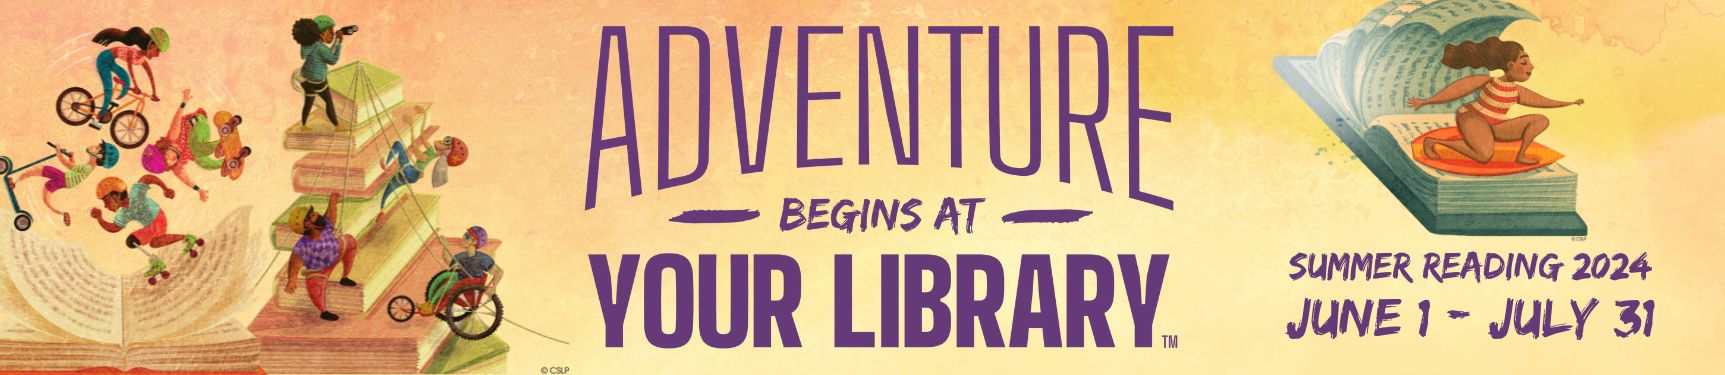 Adventure Begins at Your Library. Summer Reading 2024. June 1 - July 31.